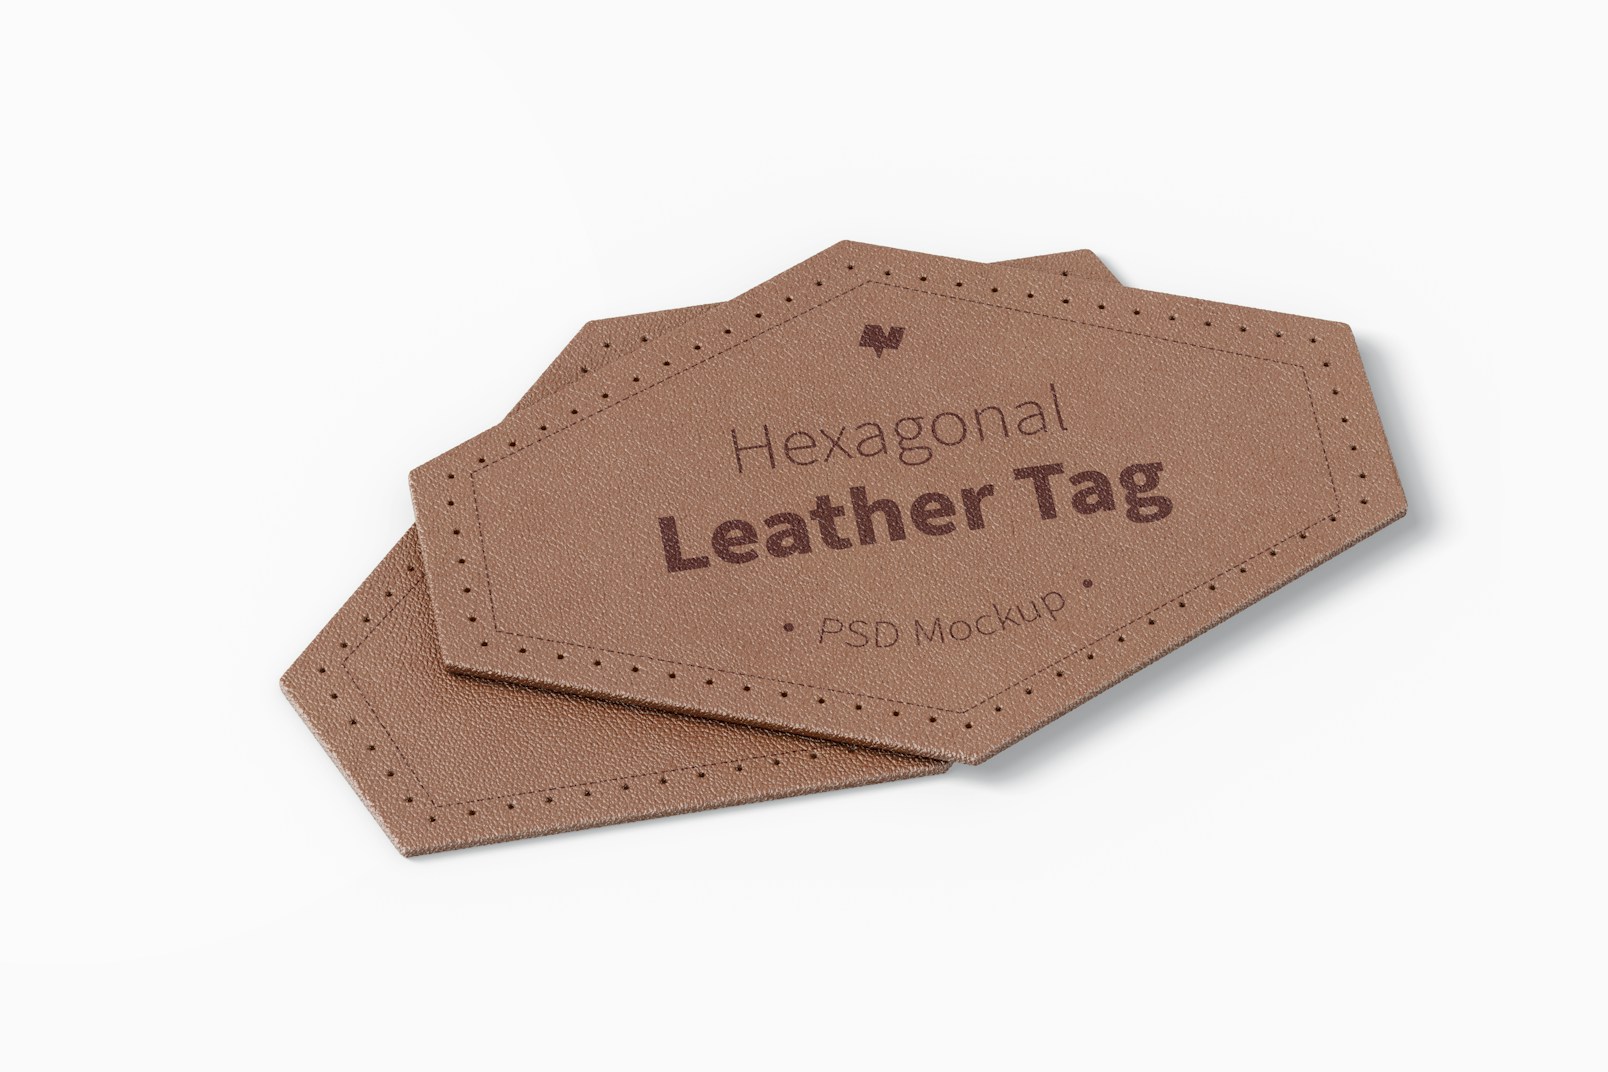 Hexagonal Leather Tag Mockup, Stacked